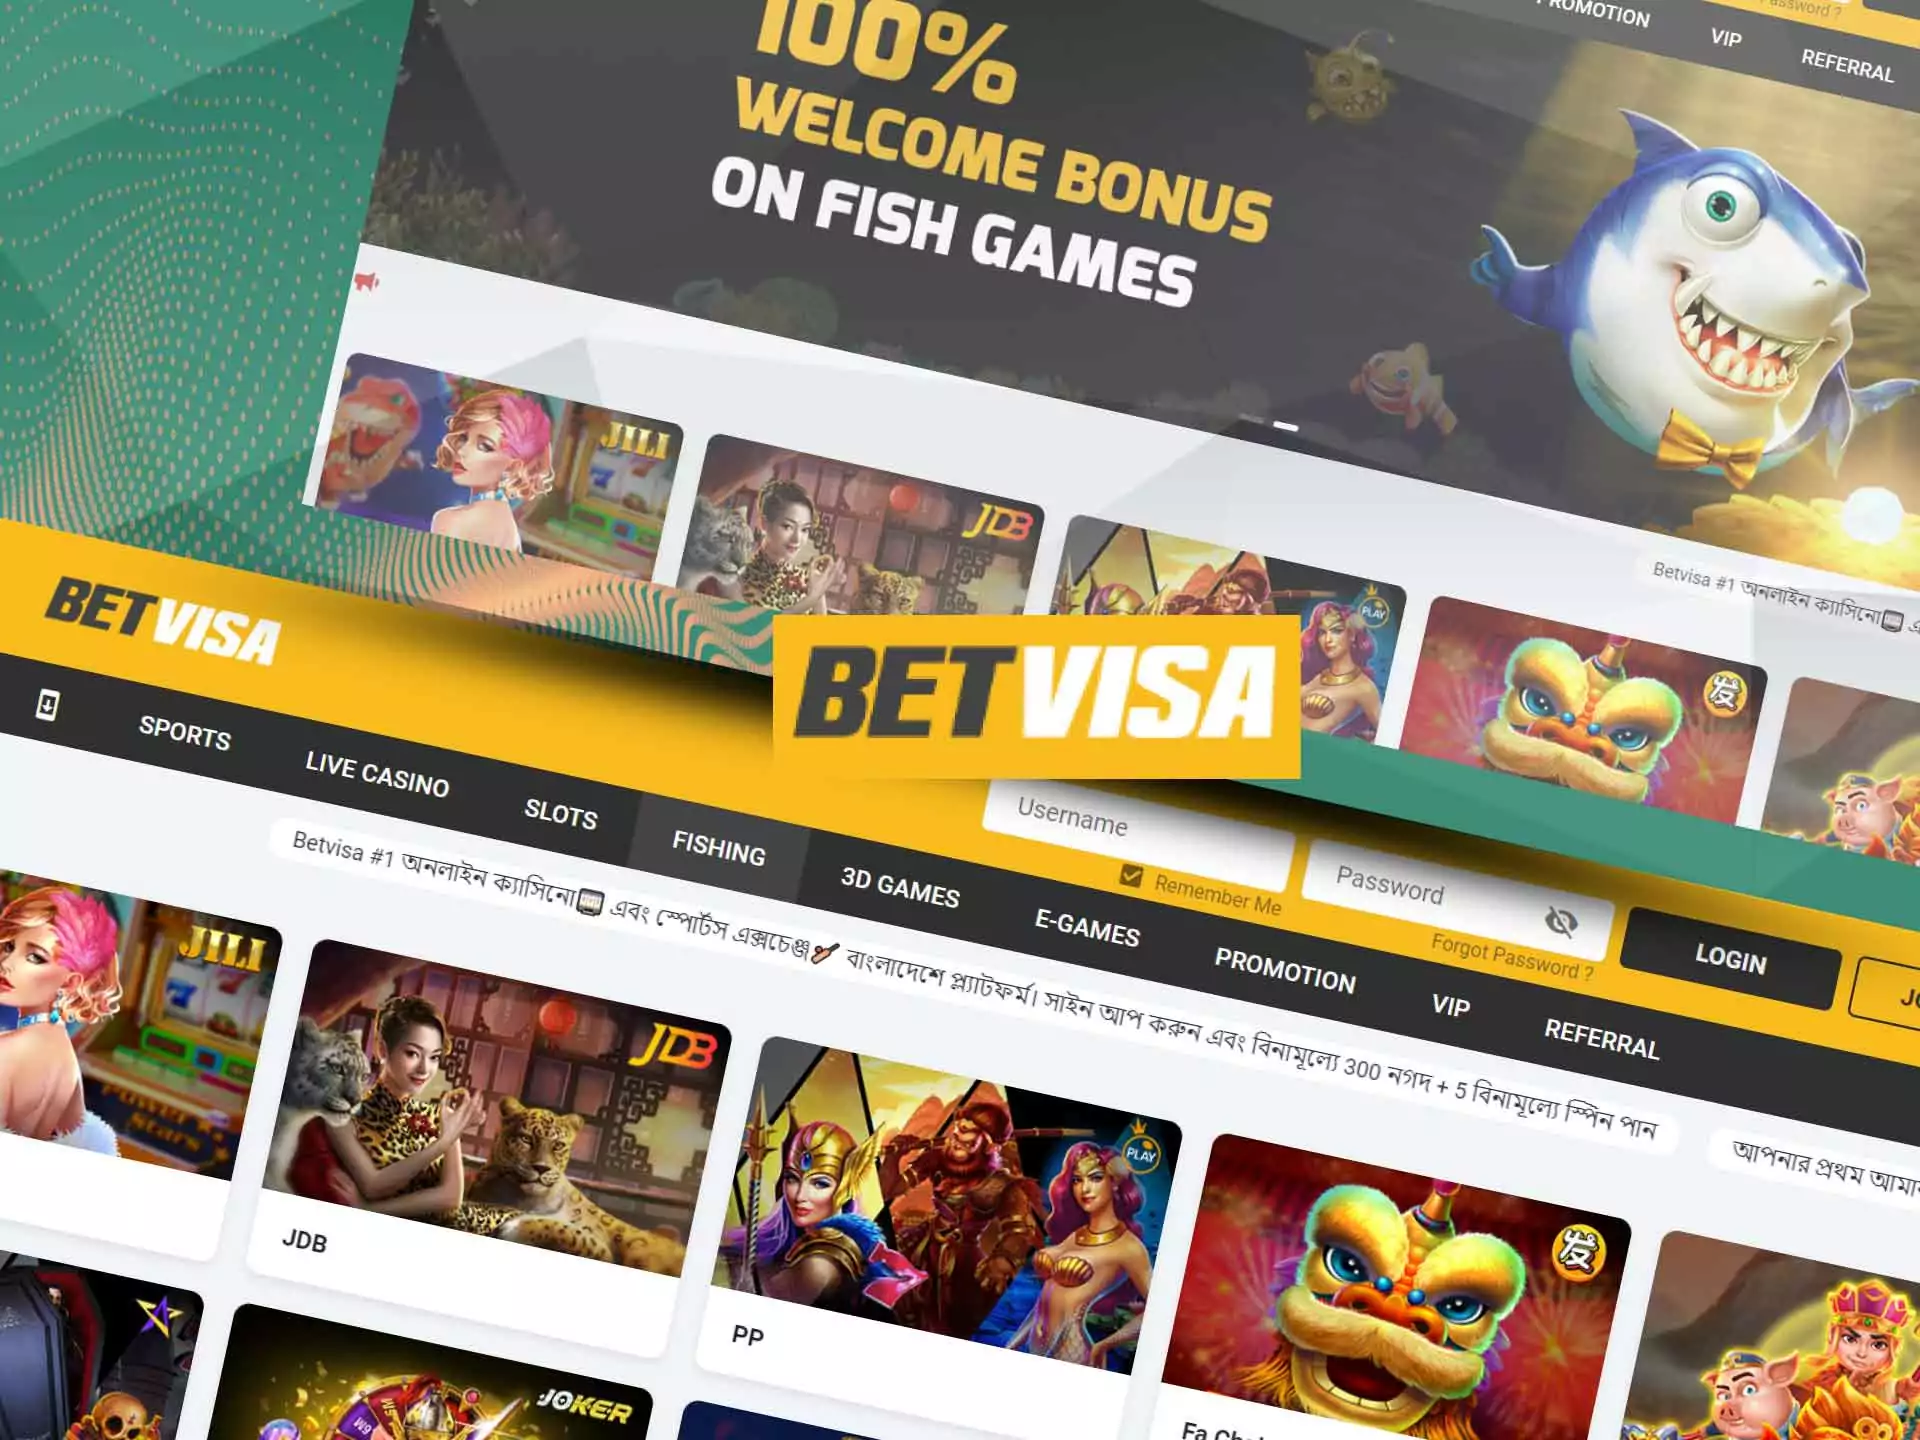 There is a specific section at BetVisa with high-class games.